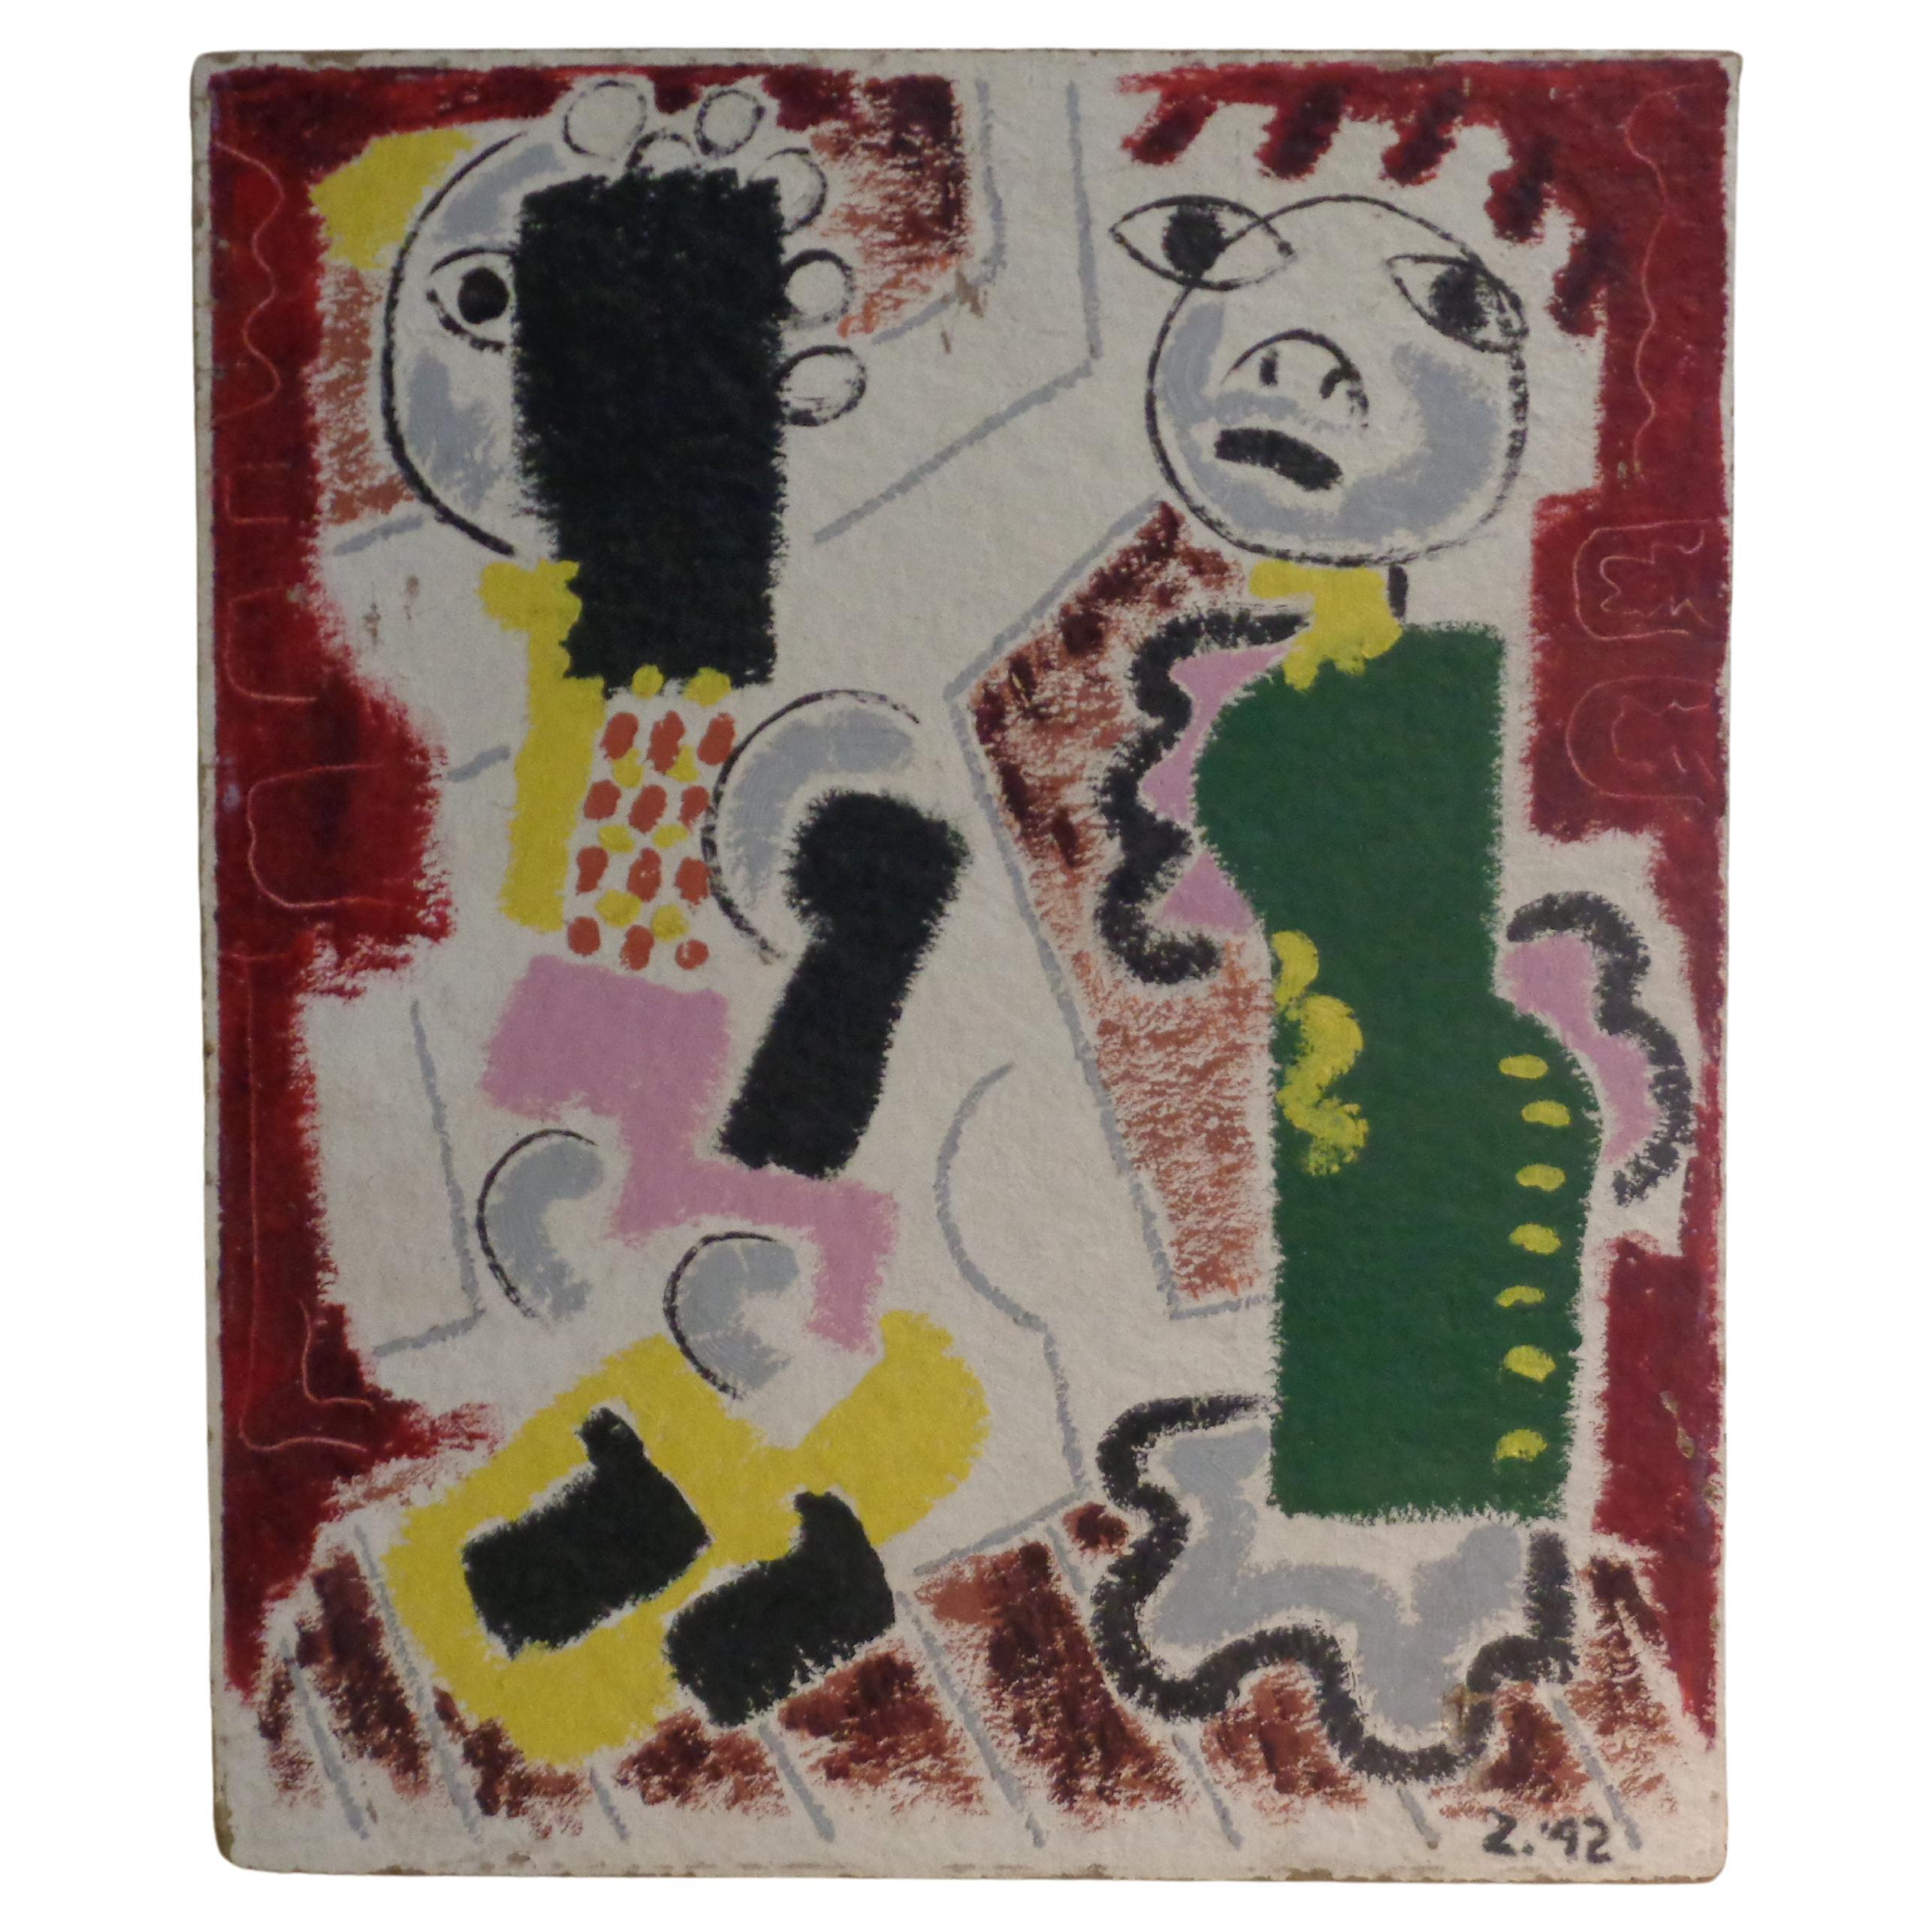 Primitive Figural Abstract Painting - Zoute 1942 In Good Condition For Sale In Rochester, NY